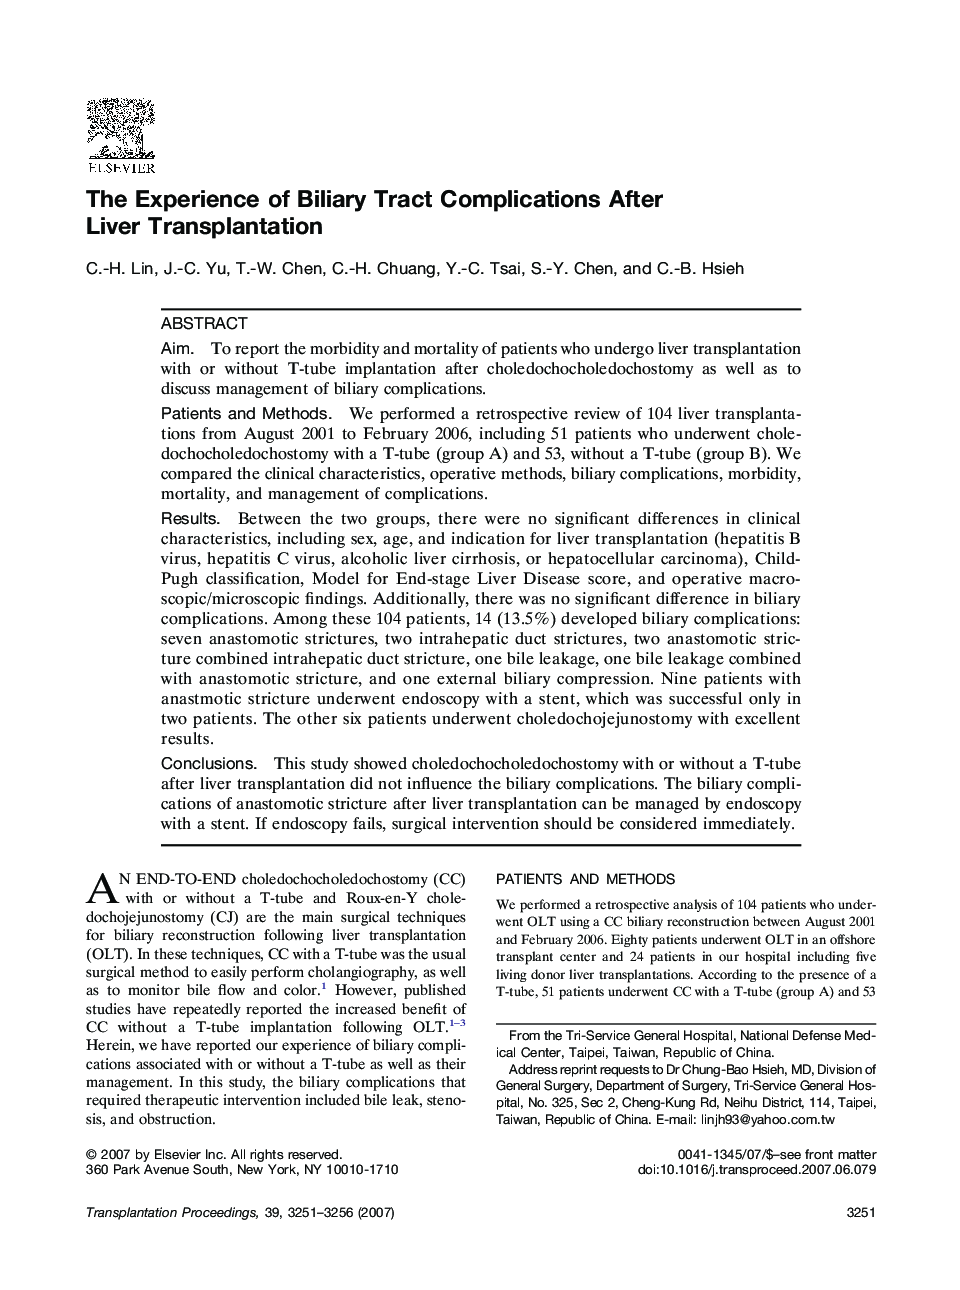 The Experience of Biliary Tract Complications After Liver Transplantation